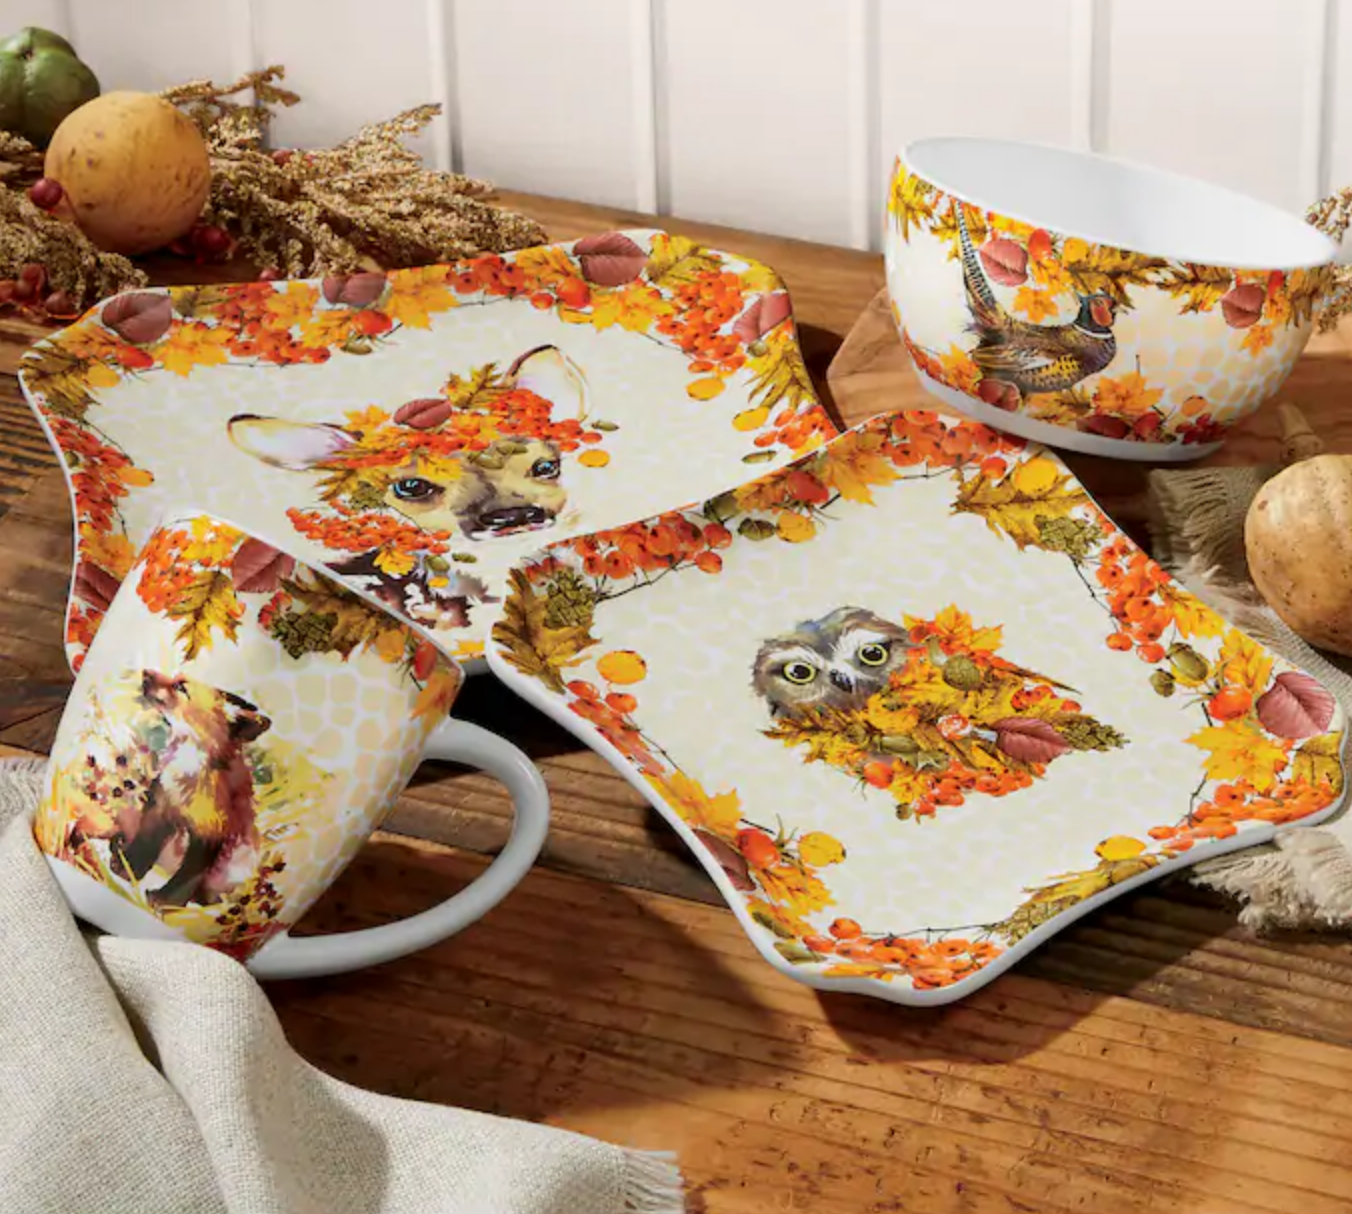 Four dishes with fall-themed decorations